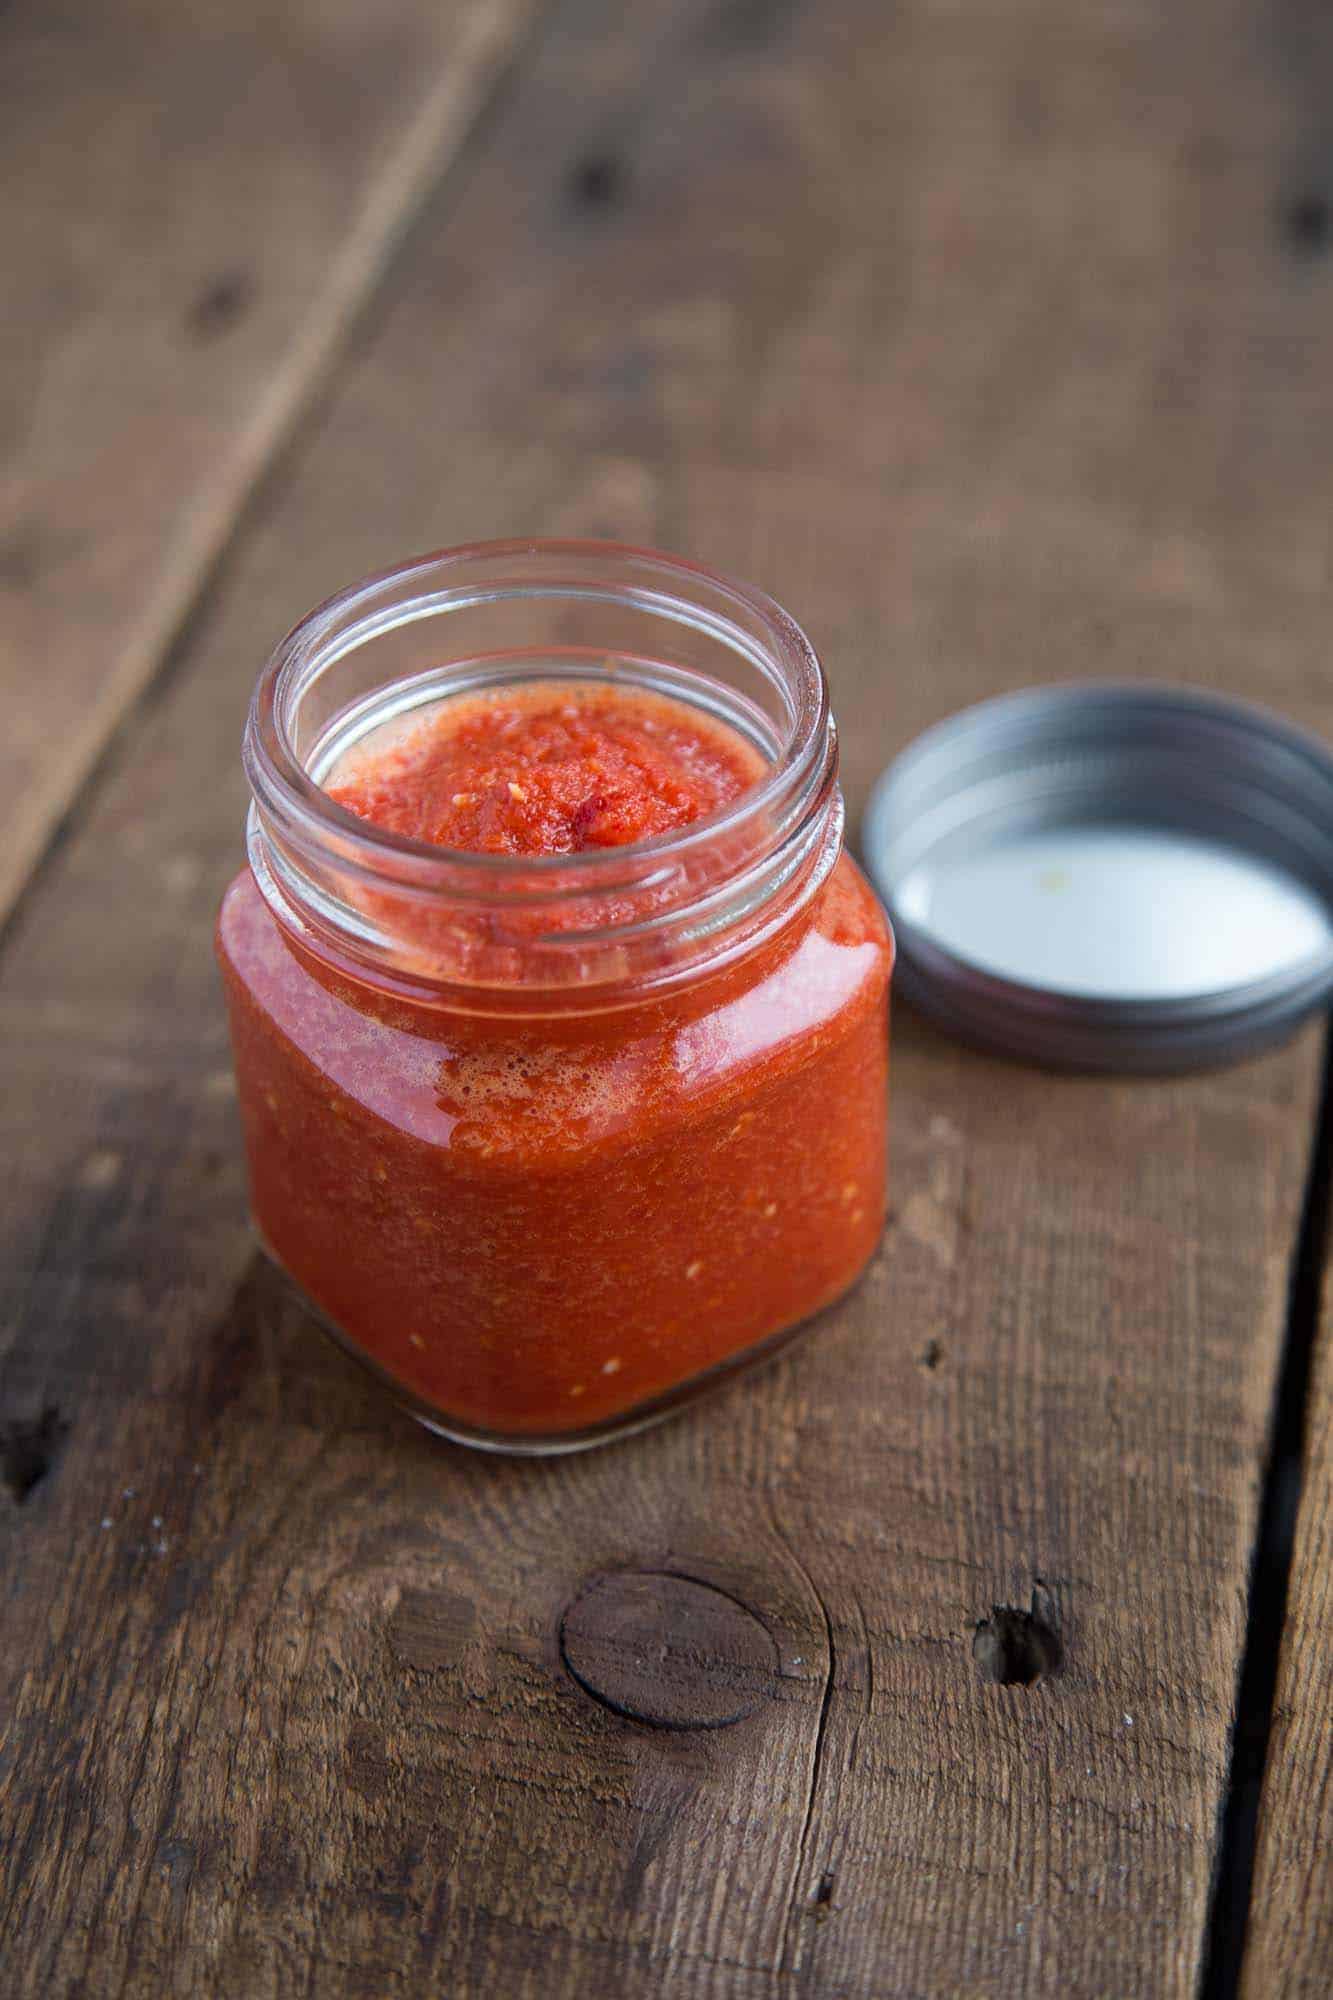 Pili Pili African Hot Sauce in a glass jar on a wooden table